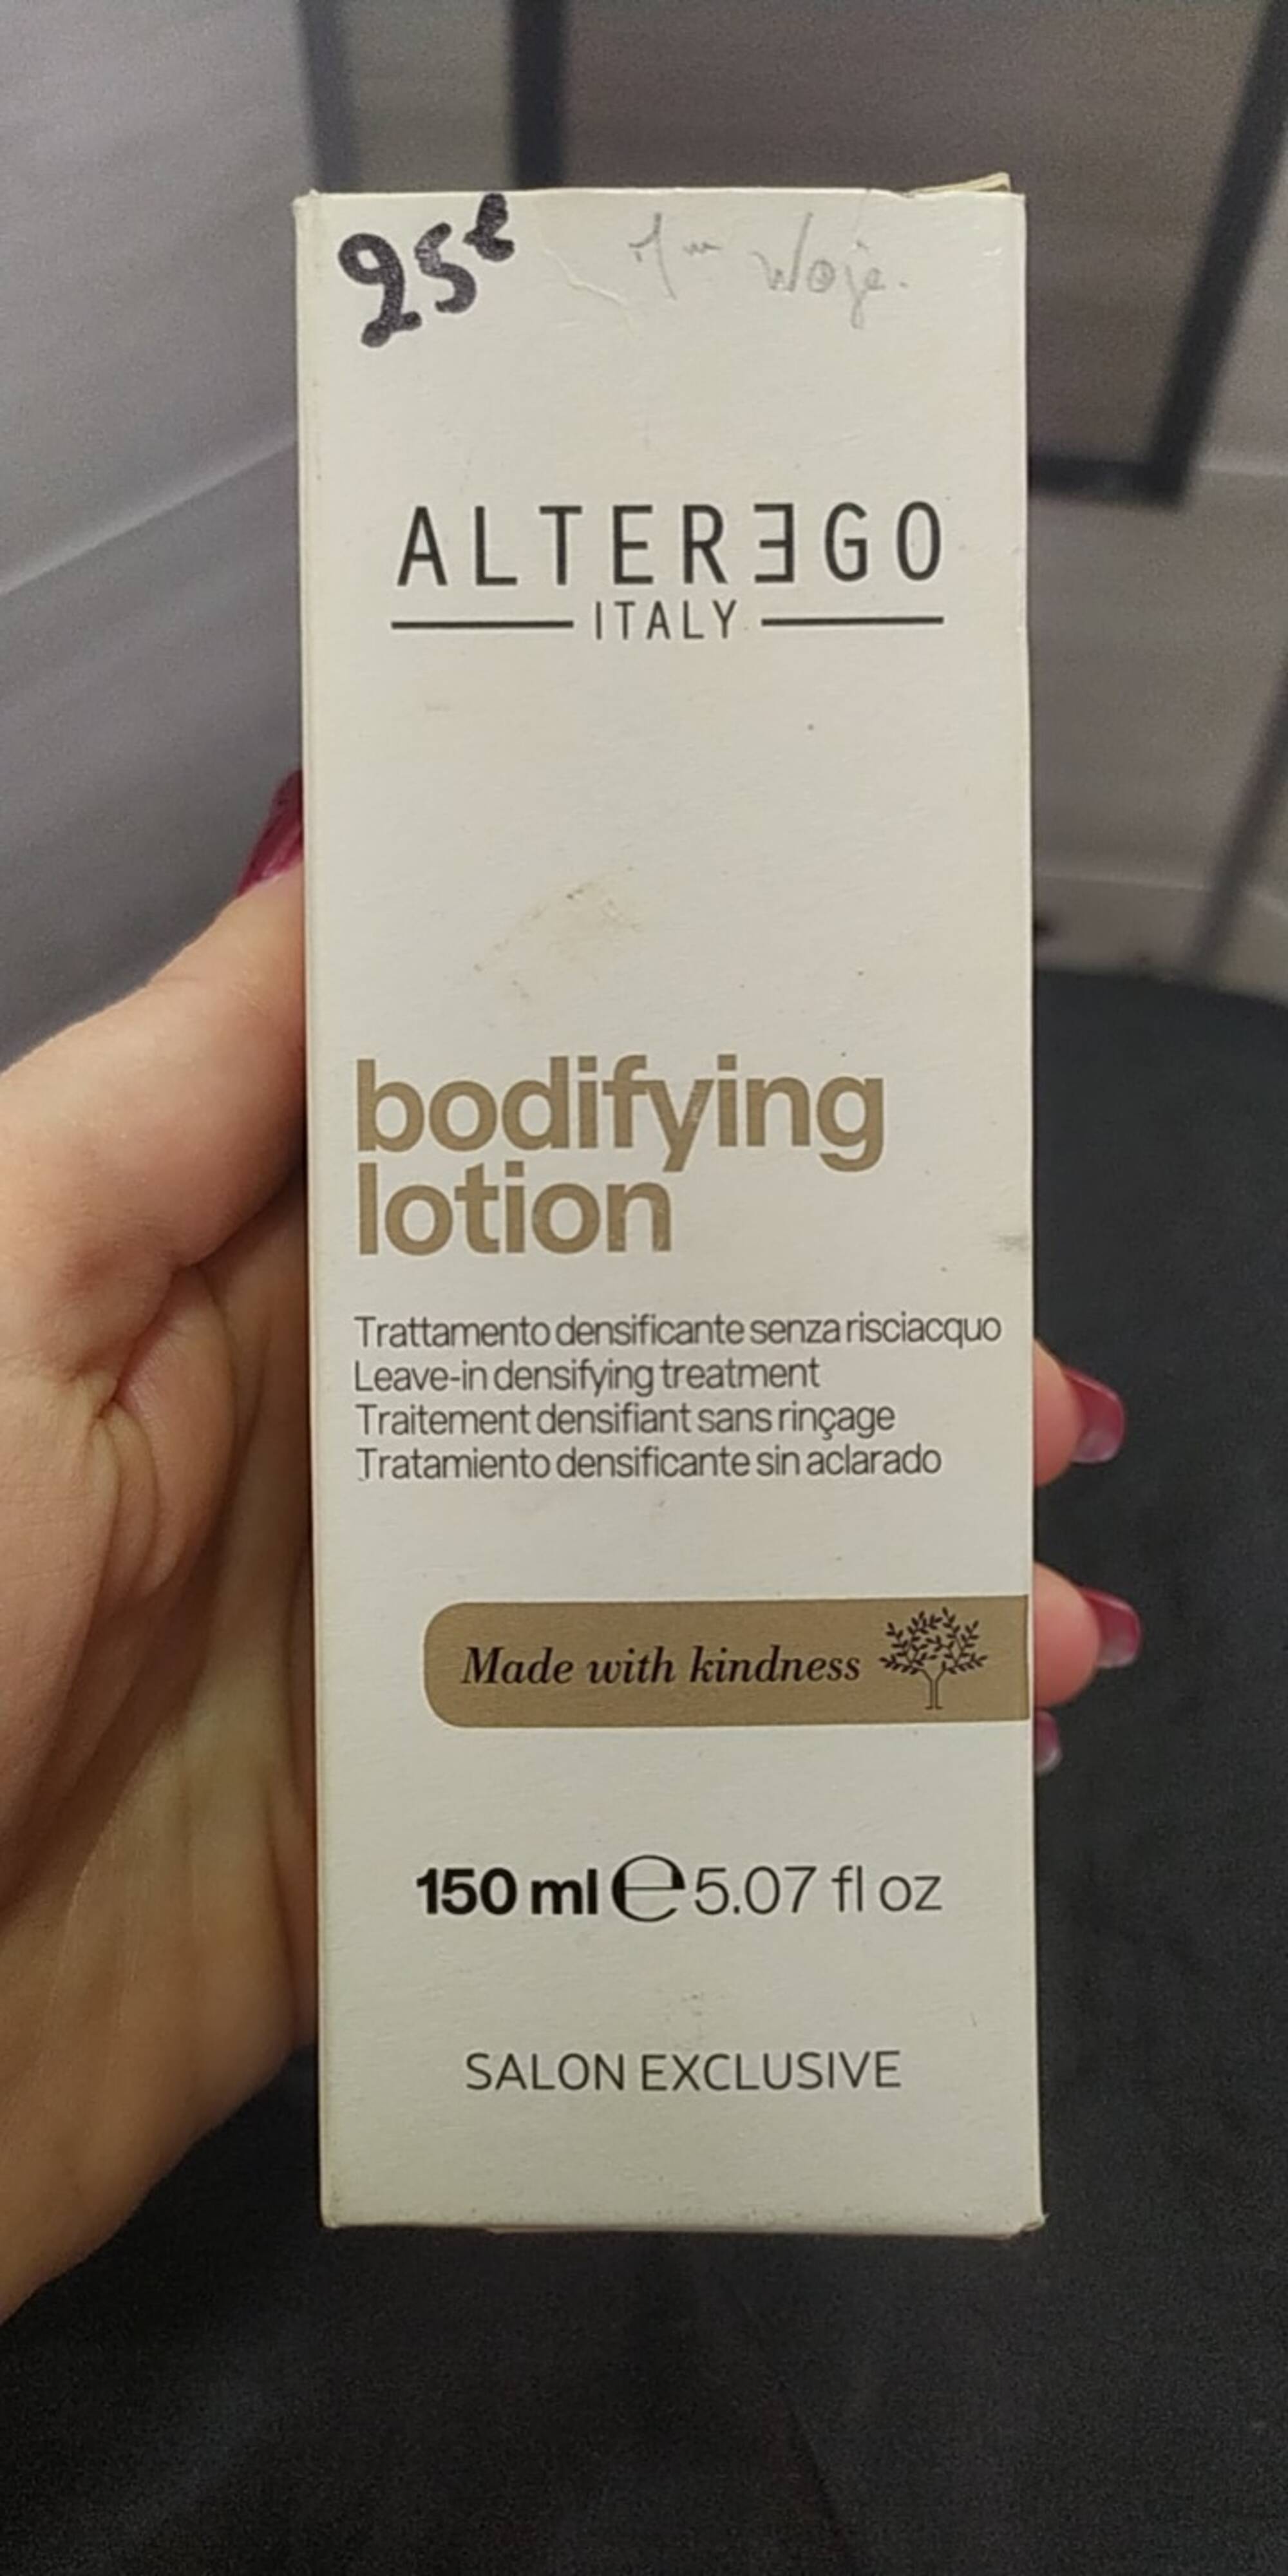 ALTER EGO - Bodifying lotion made with kindness